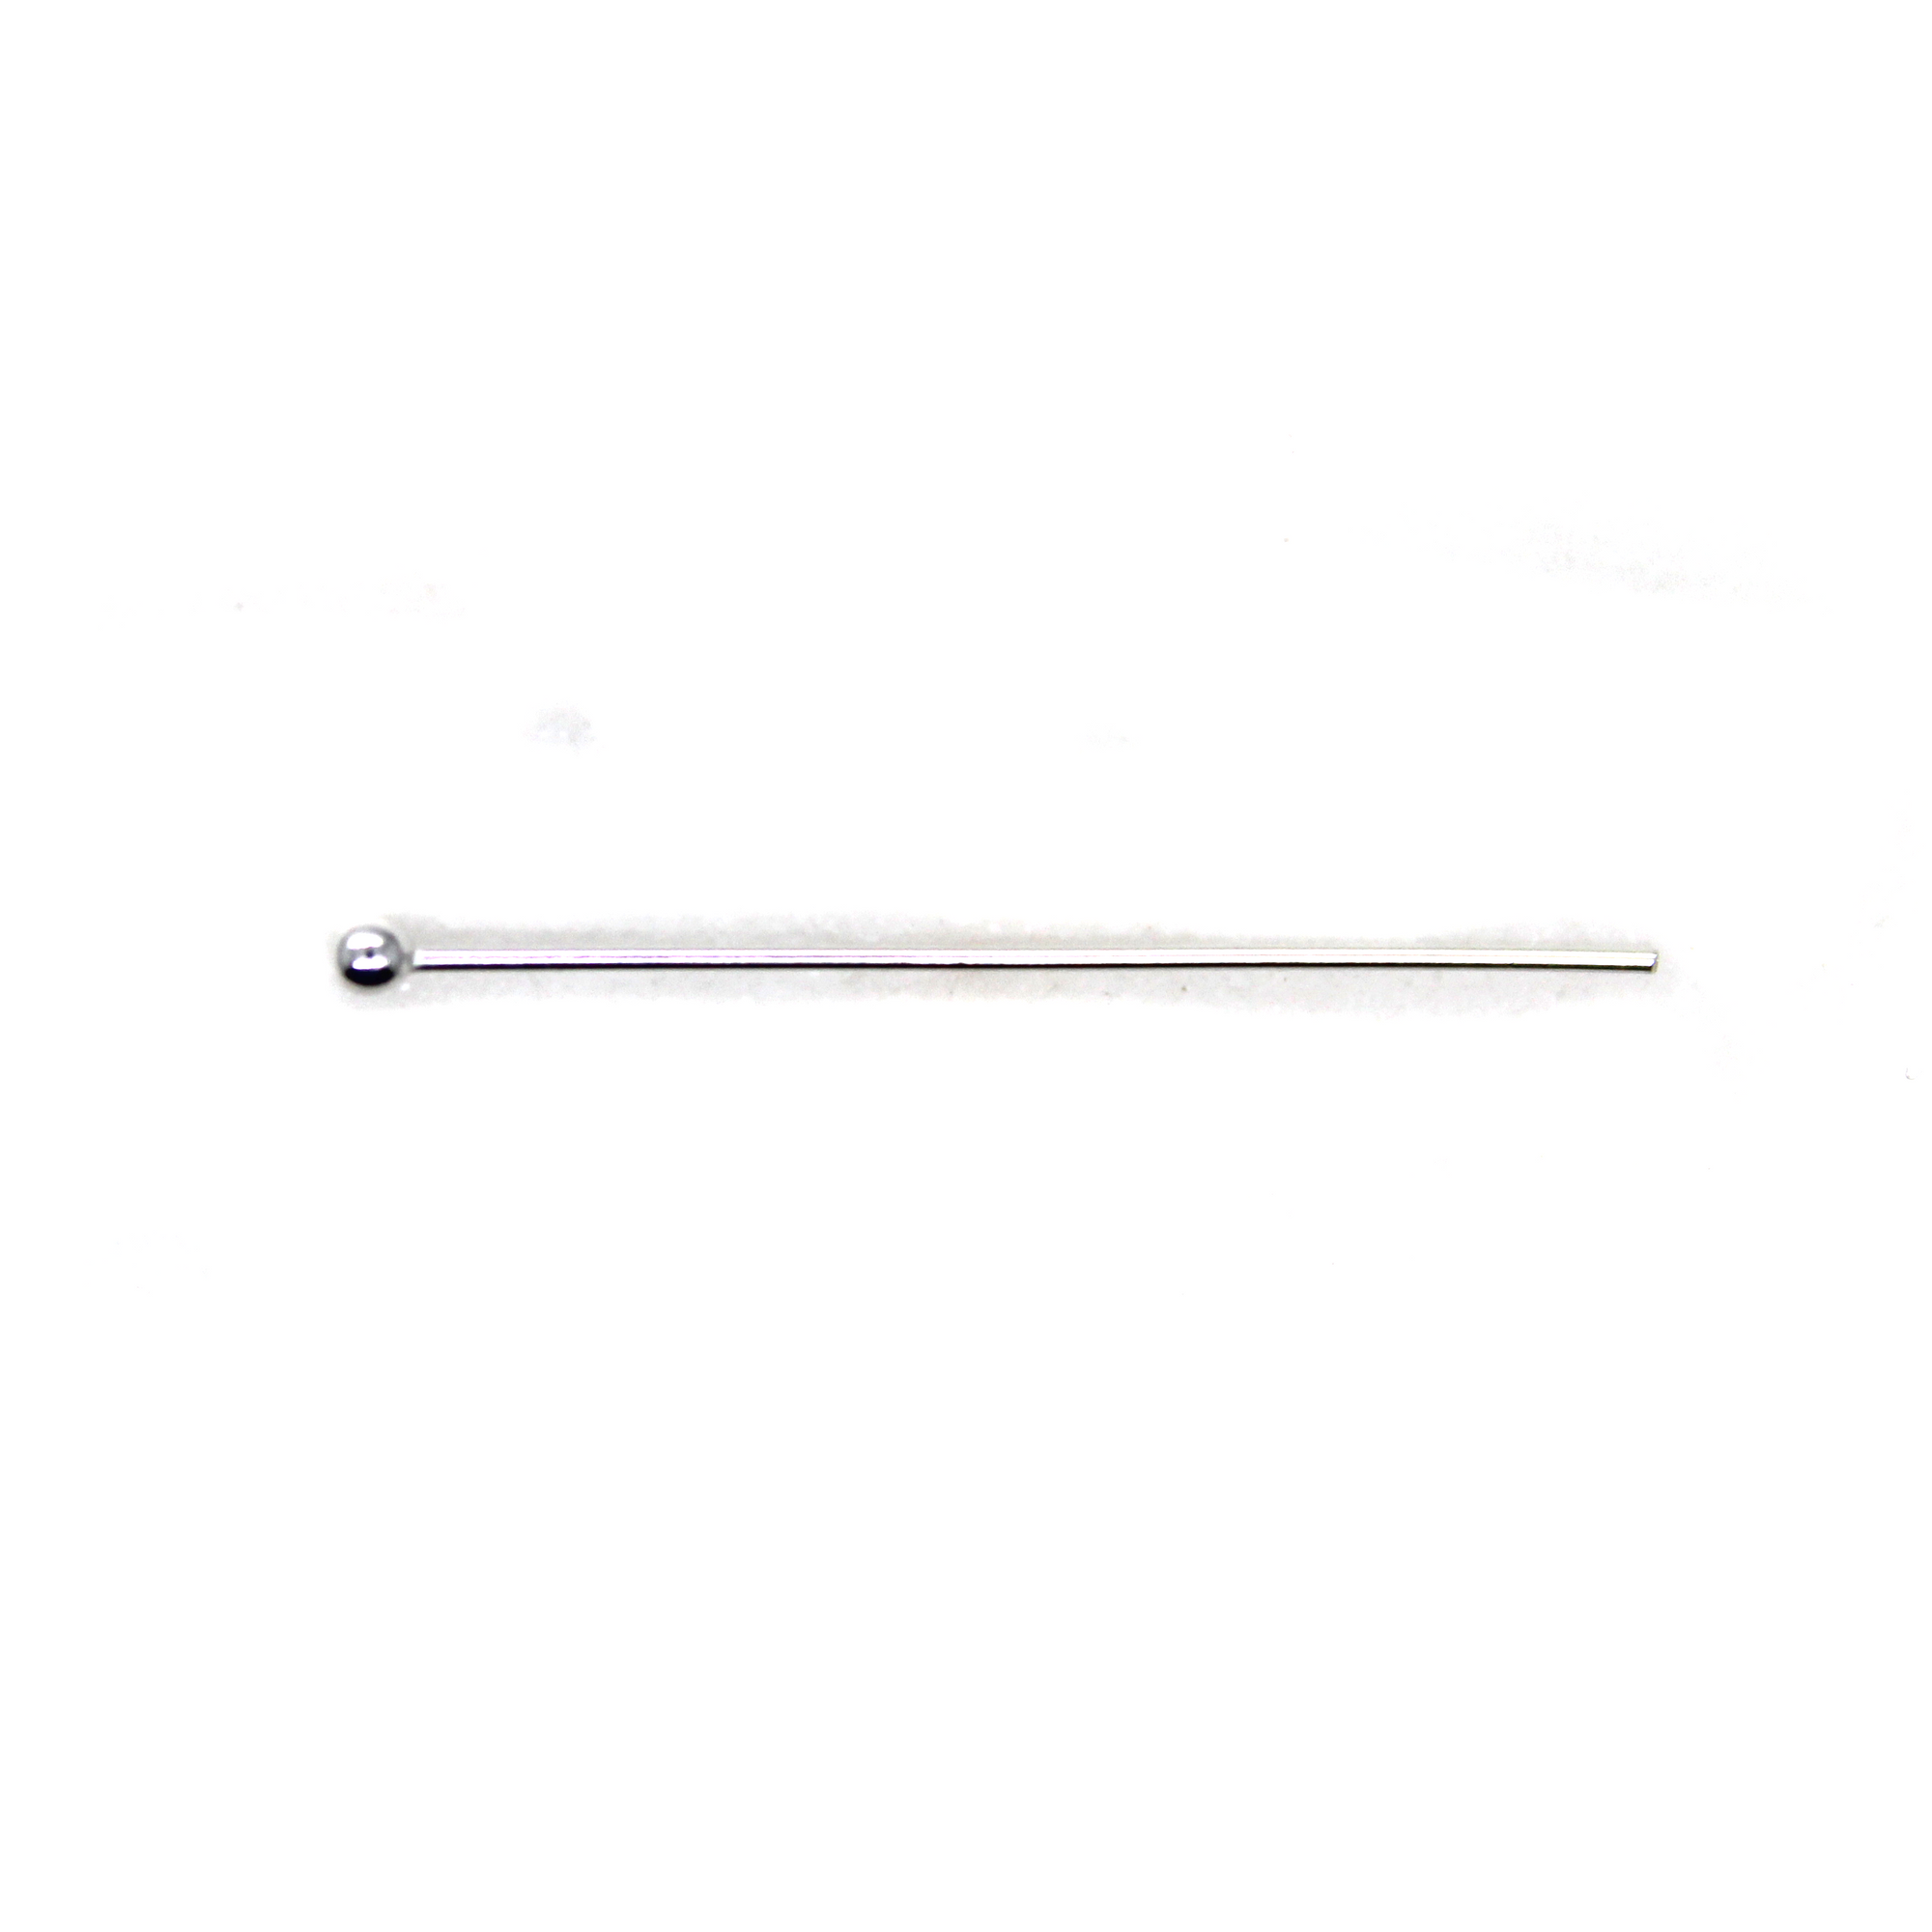 Ball Head Pin, Sterling Silver, 1.5 inches, 24 Gauge, 4pc